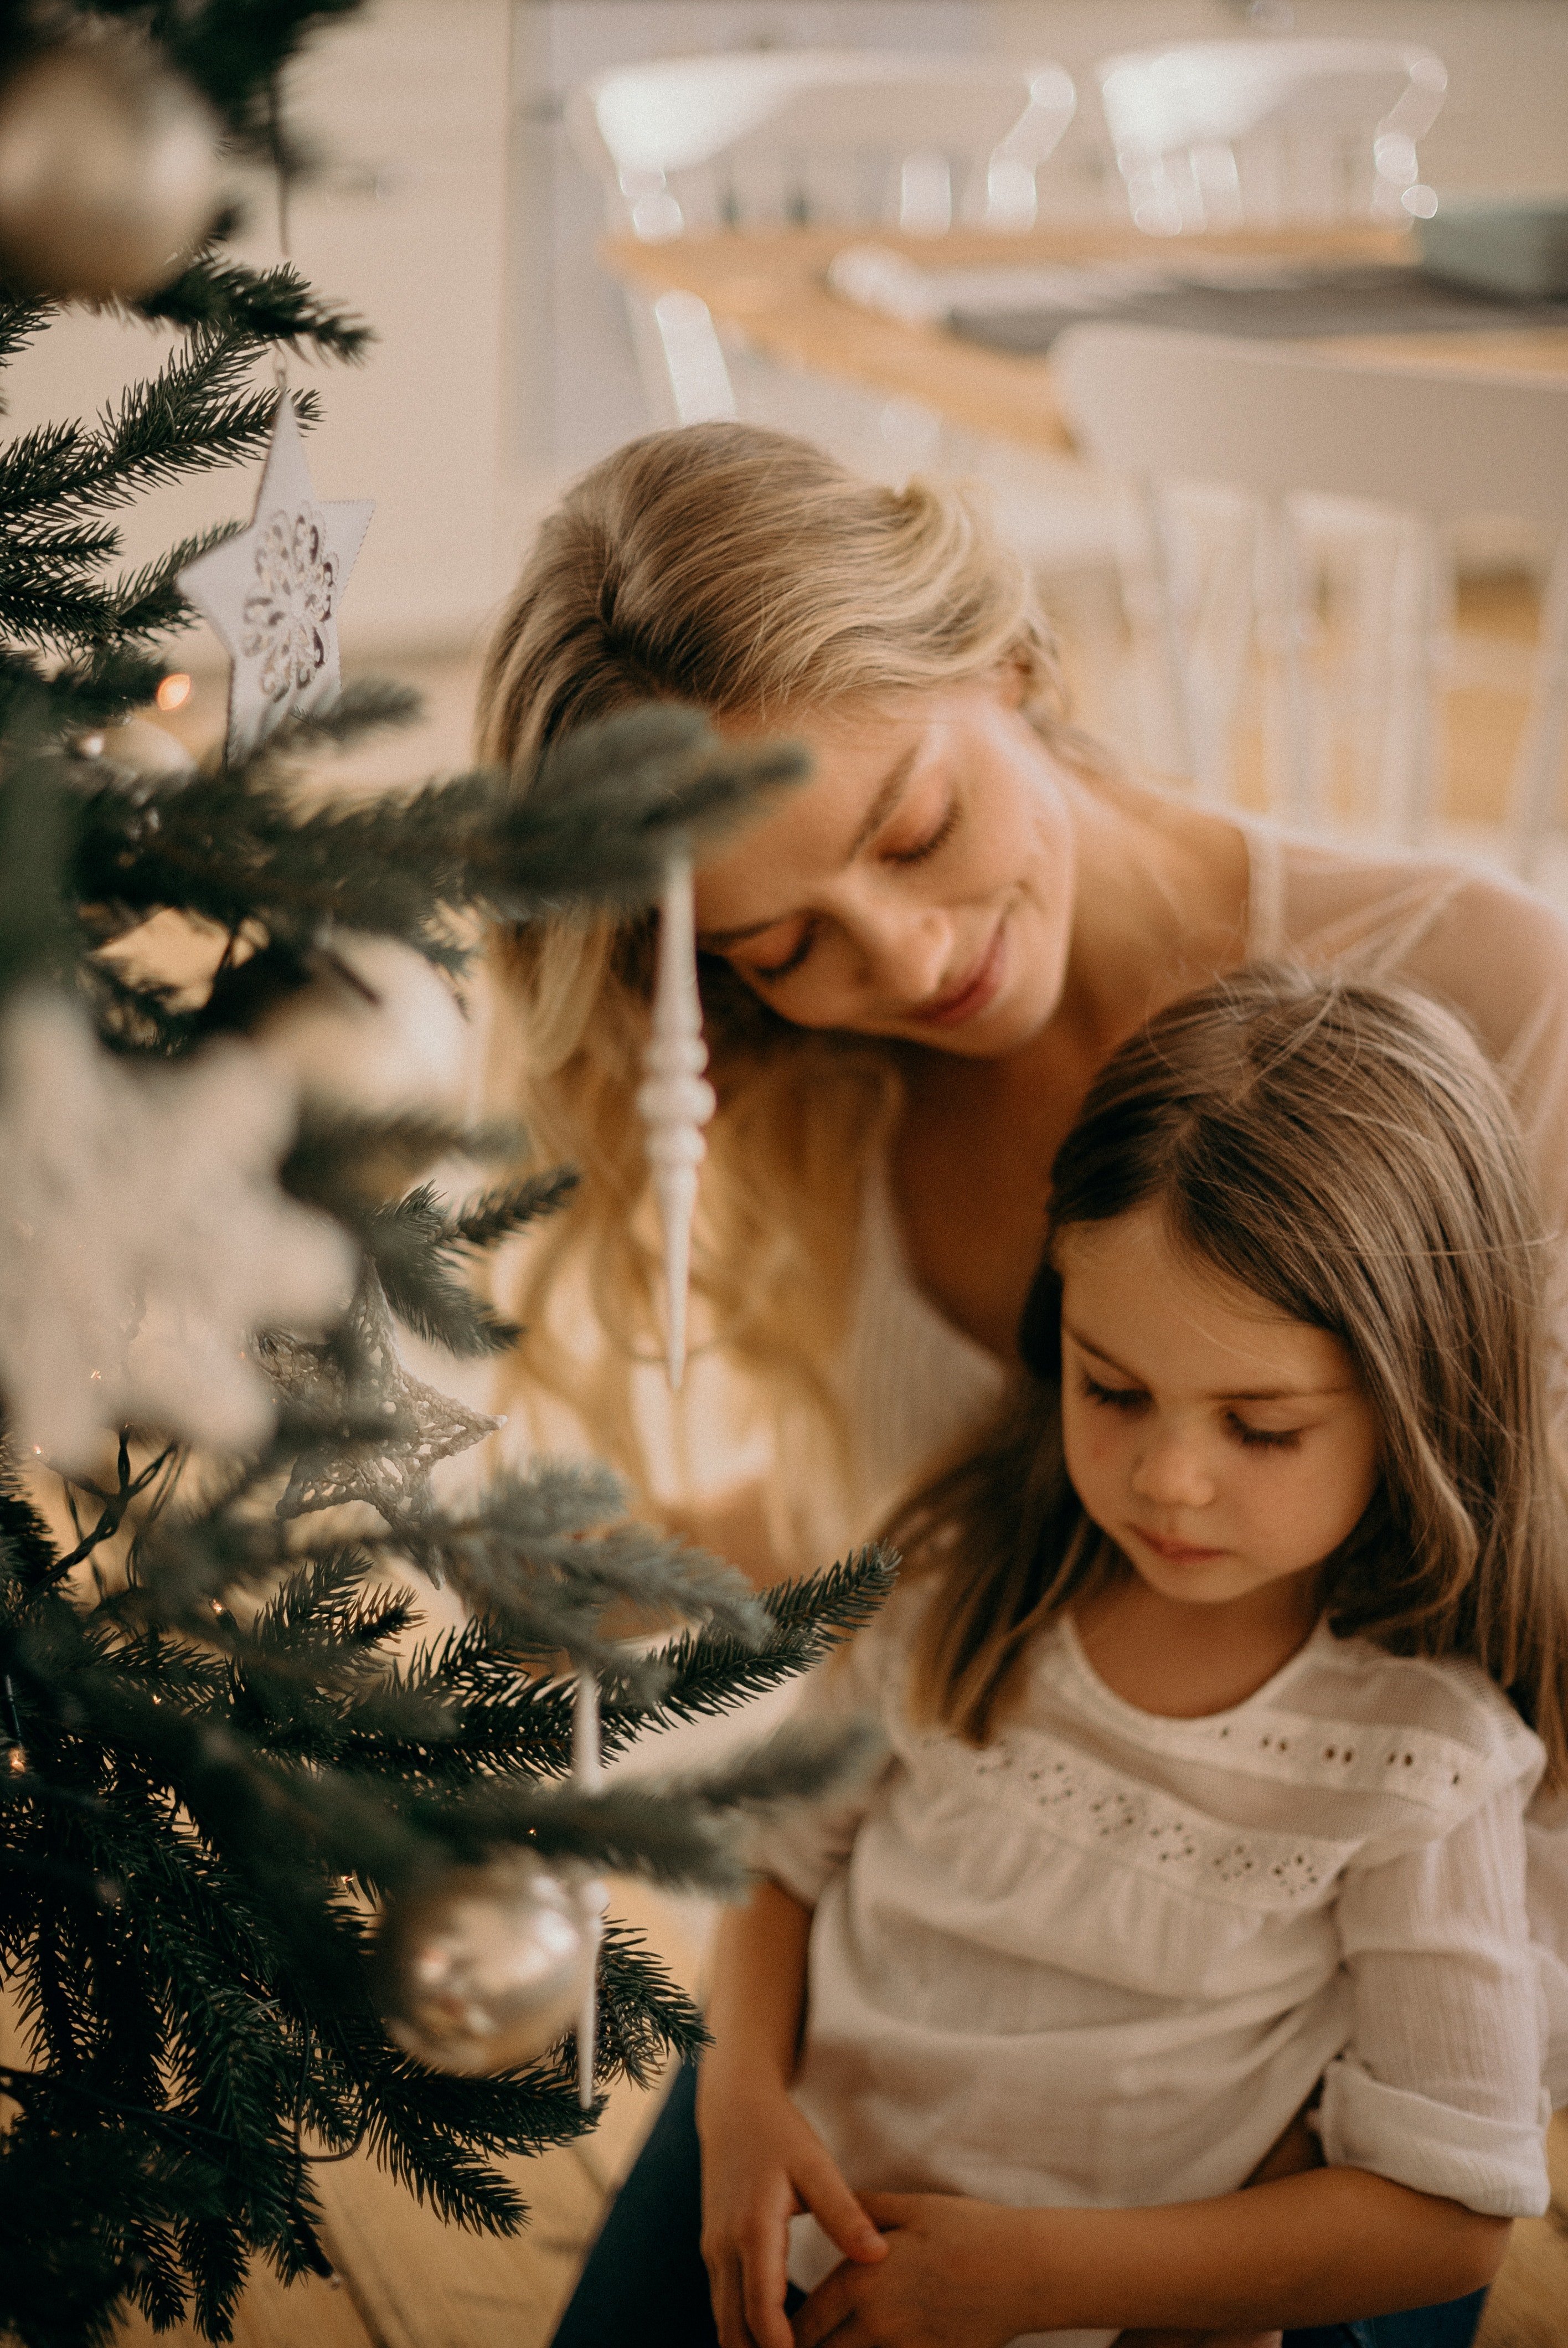 Mother and daughter. | Source: Pexels